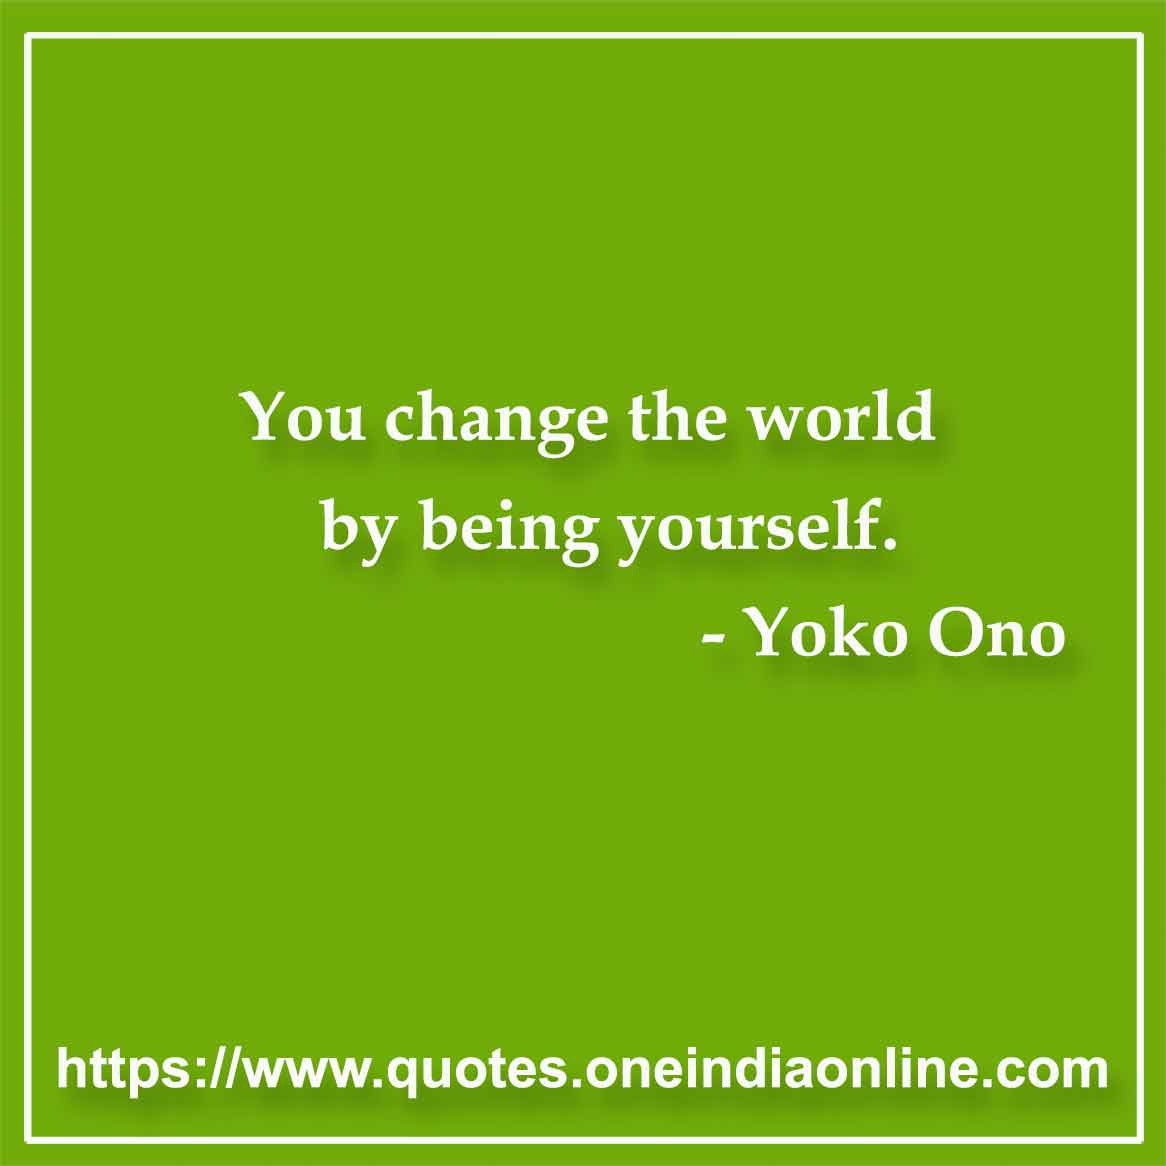 You change the world by being yourself. 

- Yoko Ono